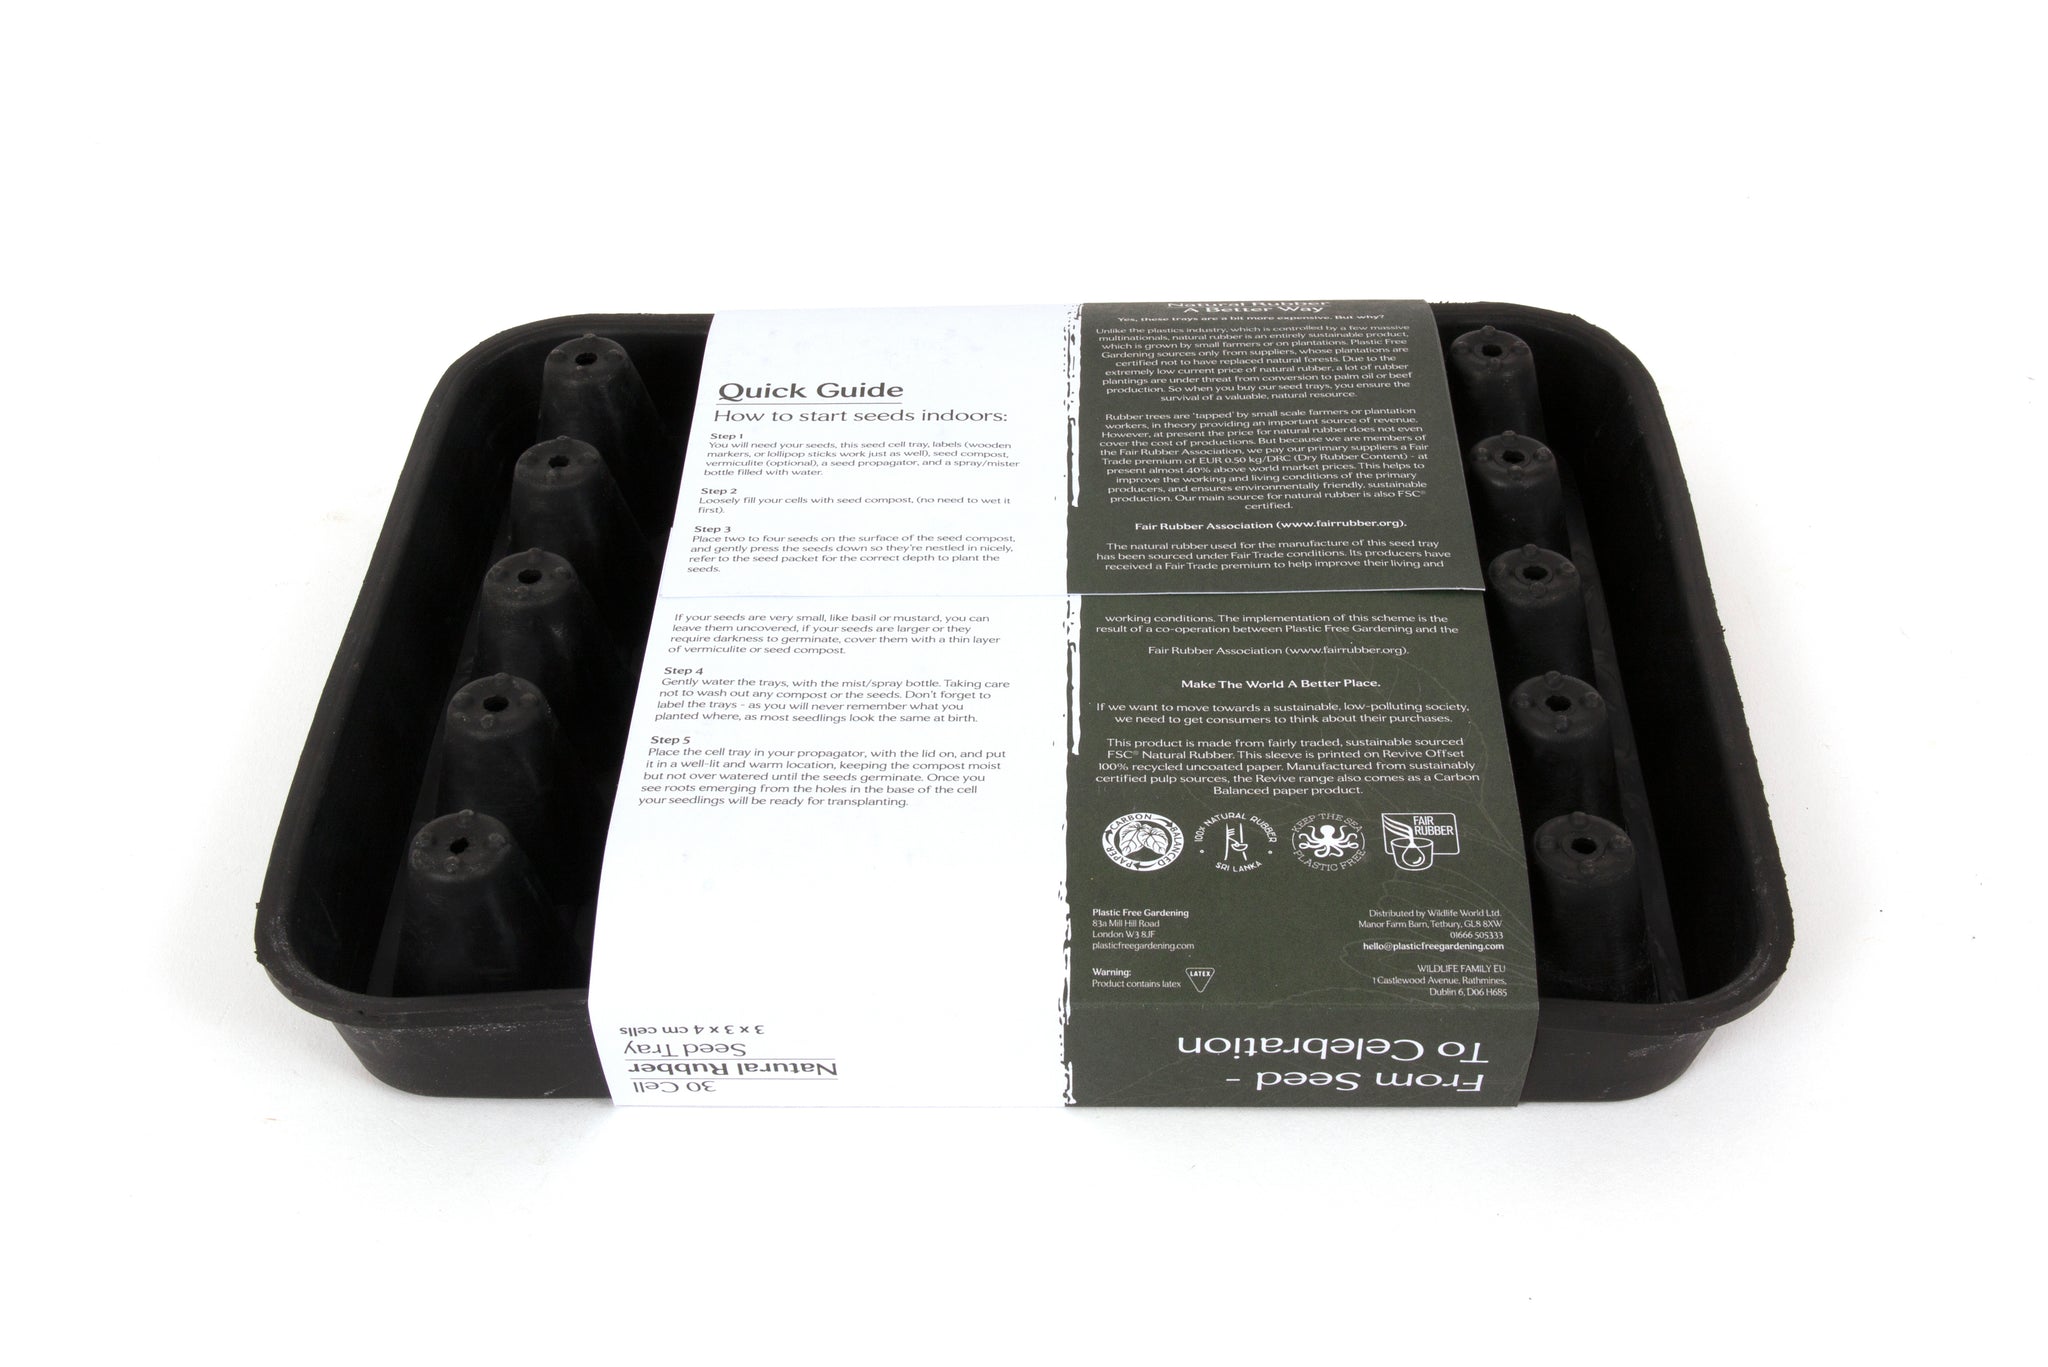 Natural Rubber Seed Tray with 30 Cells